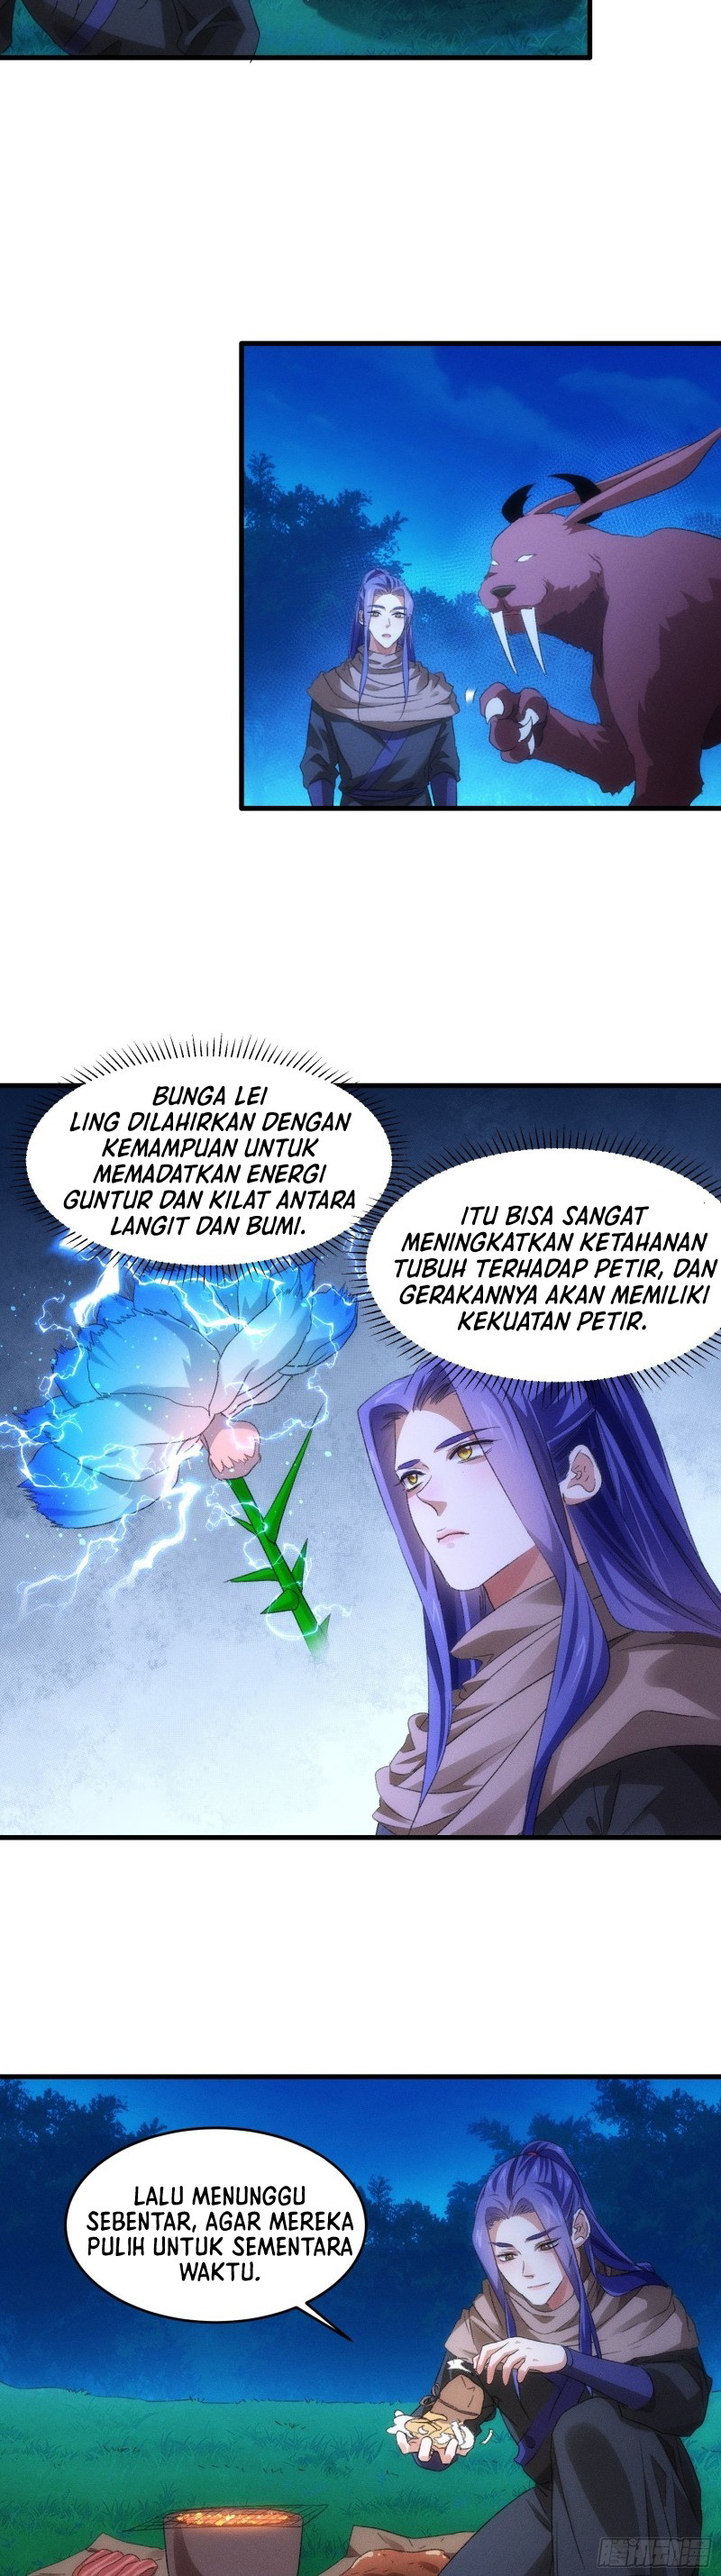 Dilarang COPAS - situs resmi www.mangacanblog.com - Komik i just dont play the card according to the routine 044 - chapter 44 45 Indonesia i just dont play the card according to the routine 044 - chapter 44 Terbaru 20|Baca Manga Komik Indonesia|Mangacan